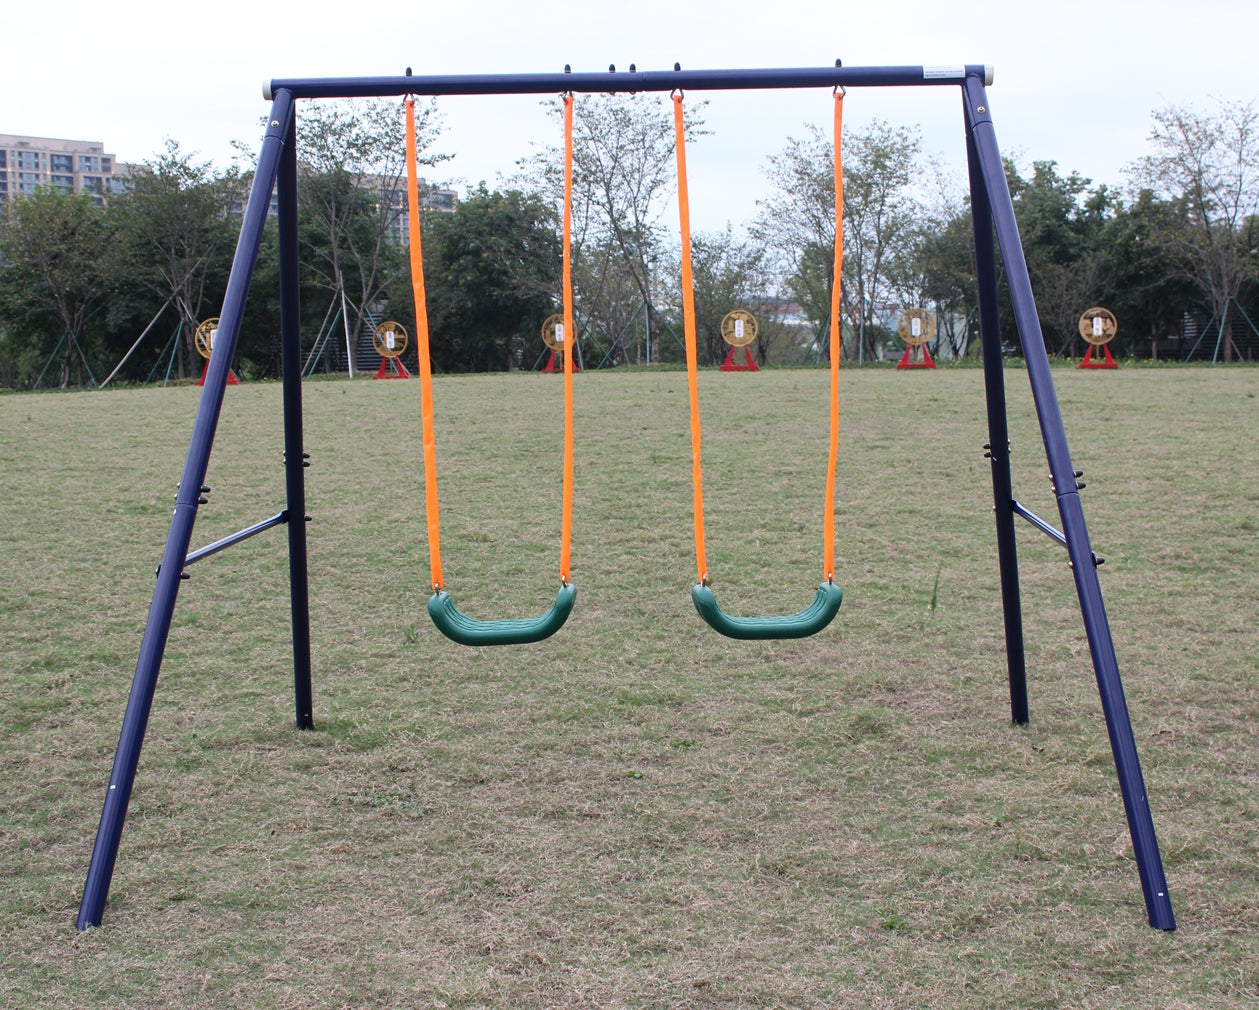 ZNTS Two Station Swing Set for Children W1408107775